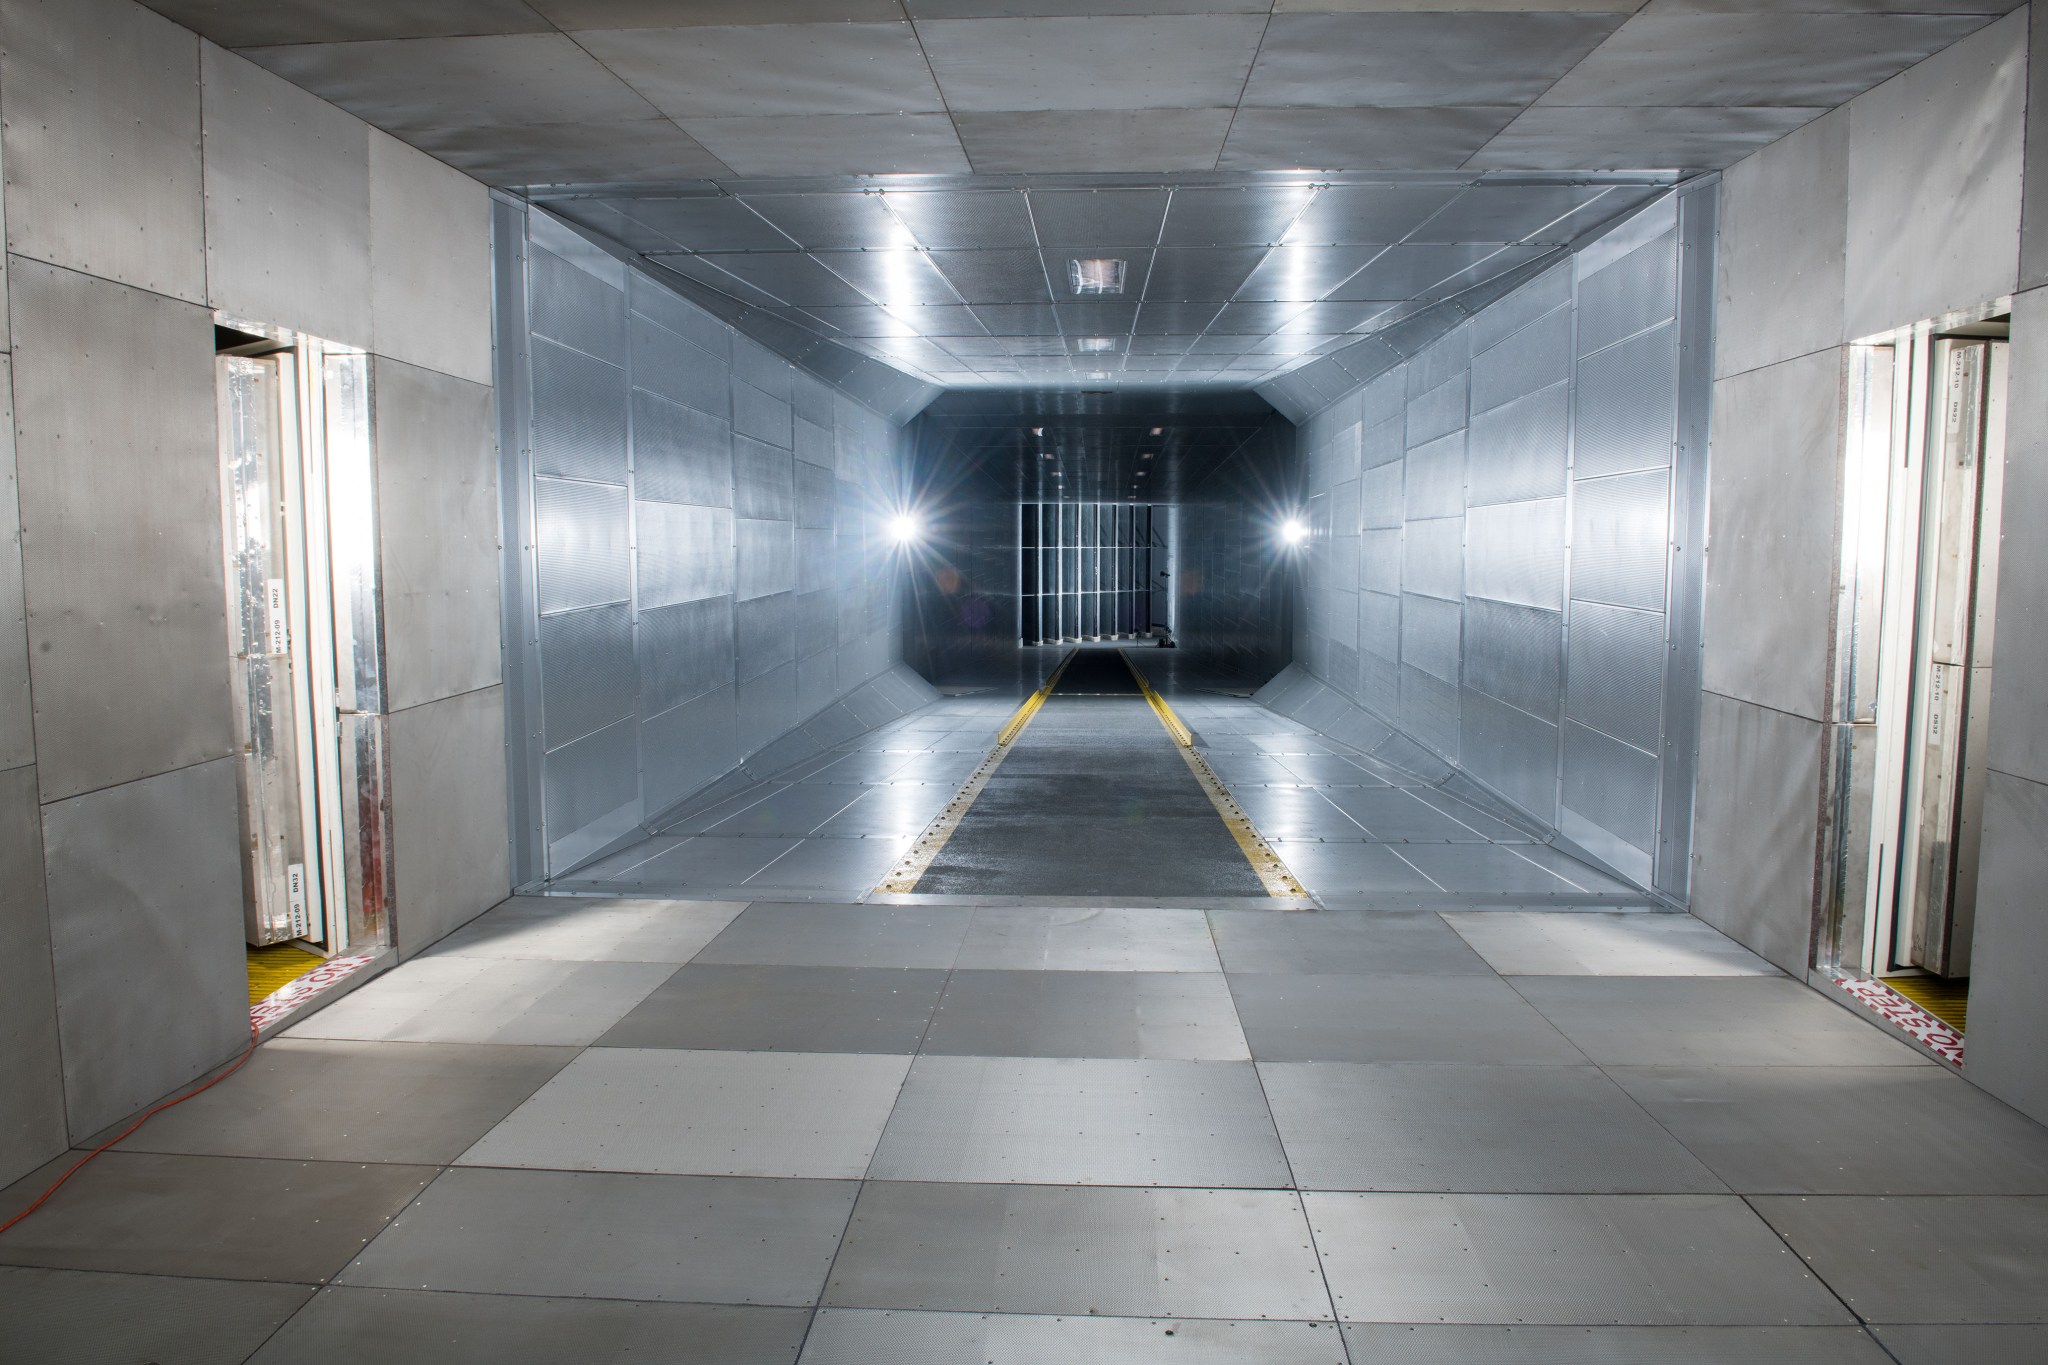 A view down the test section of the newly renovated 9 x 15 wind tunnel at NASA Glenn